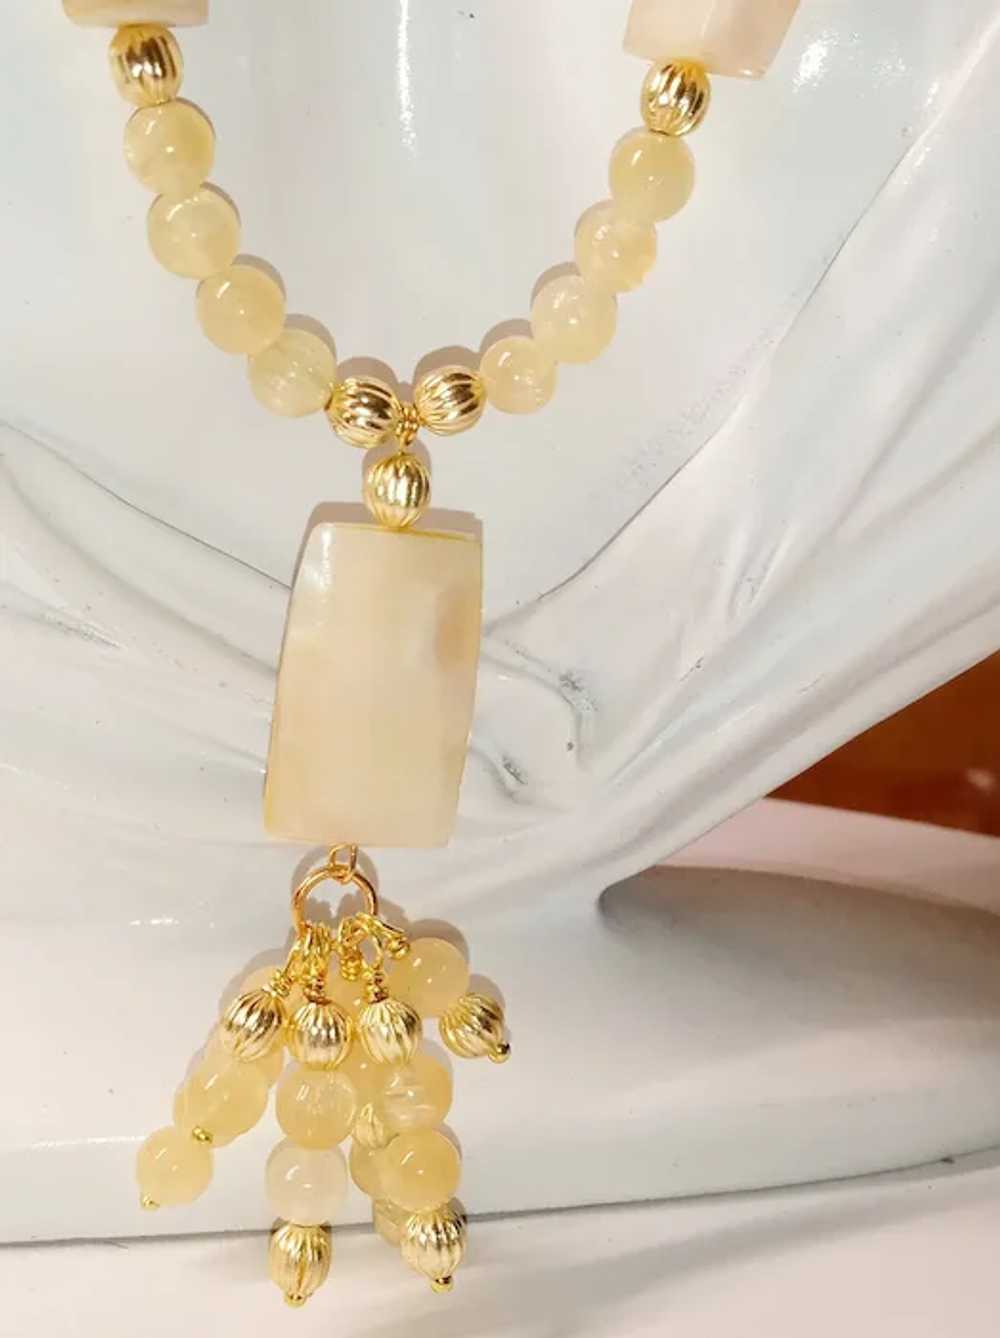 Rare Chatoyant Calcite Beaded Necklace - image 5